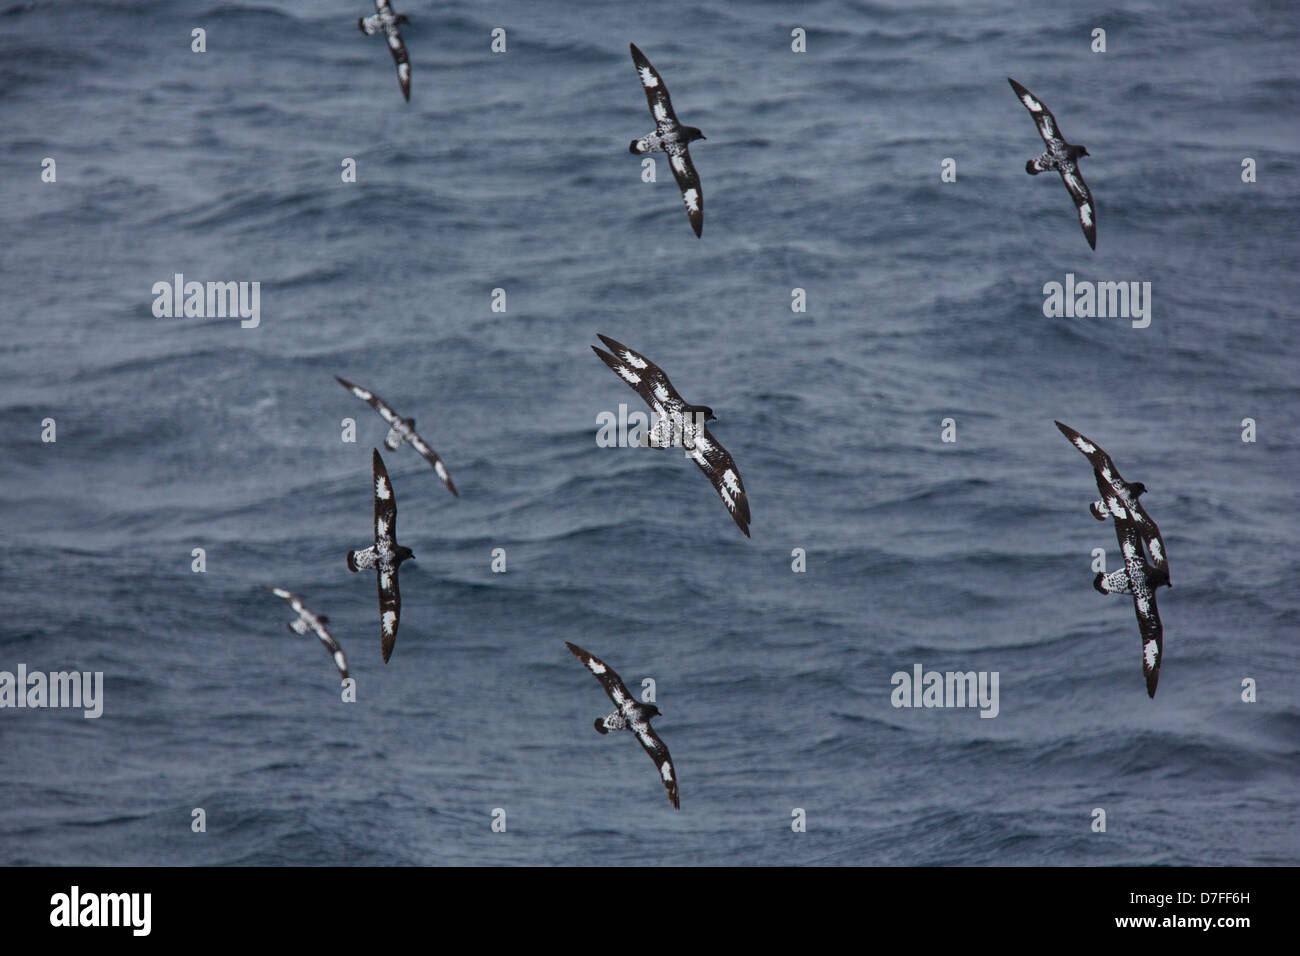 Prions in the Drake Passage. Stock Photo